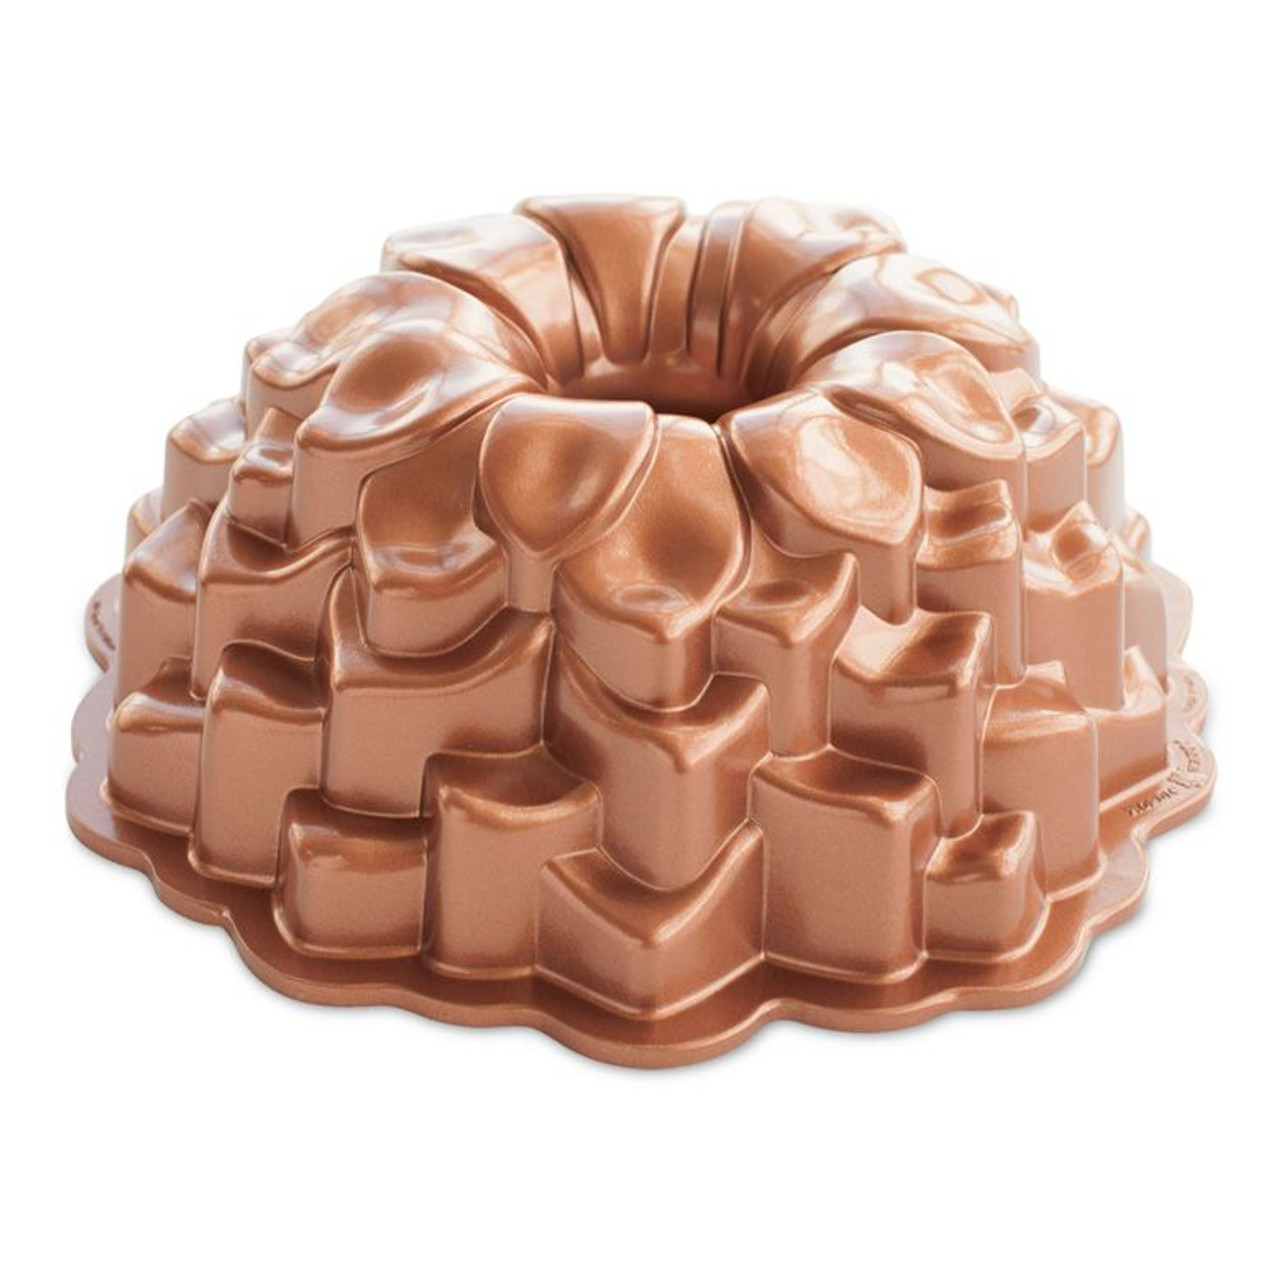 https://cdn11.bigcommerce.com/s-hccytny0od/images/stencil/1280x1280/products/735/3953/nordic-ware-blossom-bundt-pan__30960.1514639538.jpg?c=2?imbypass=on